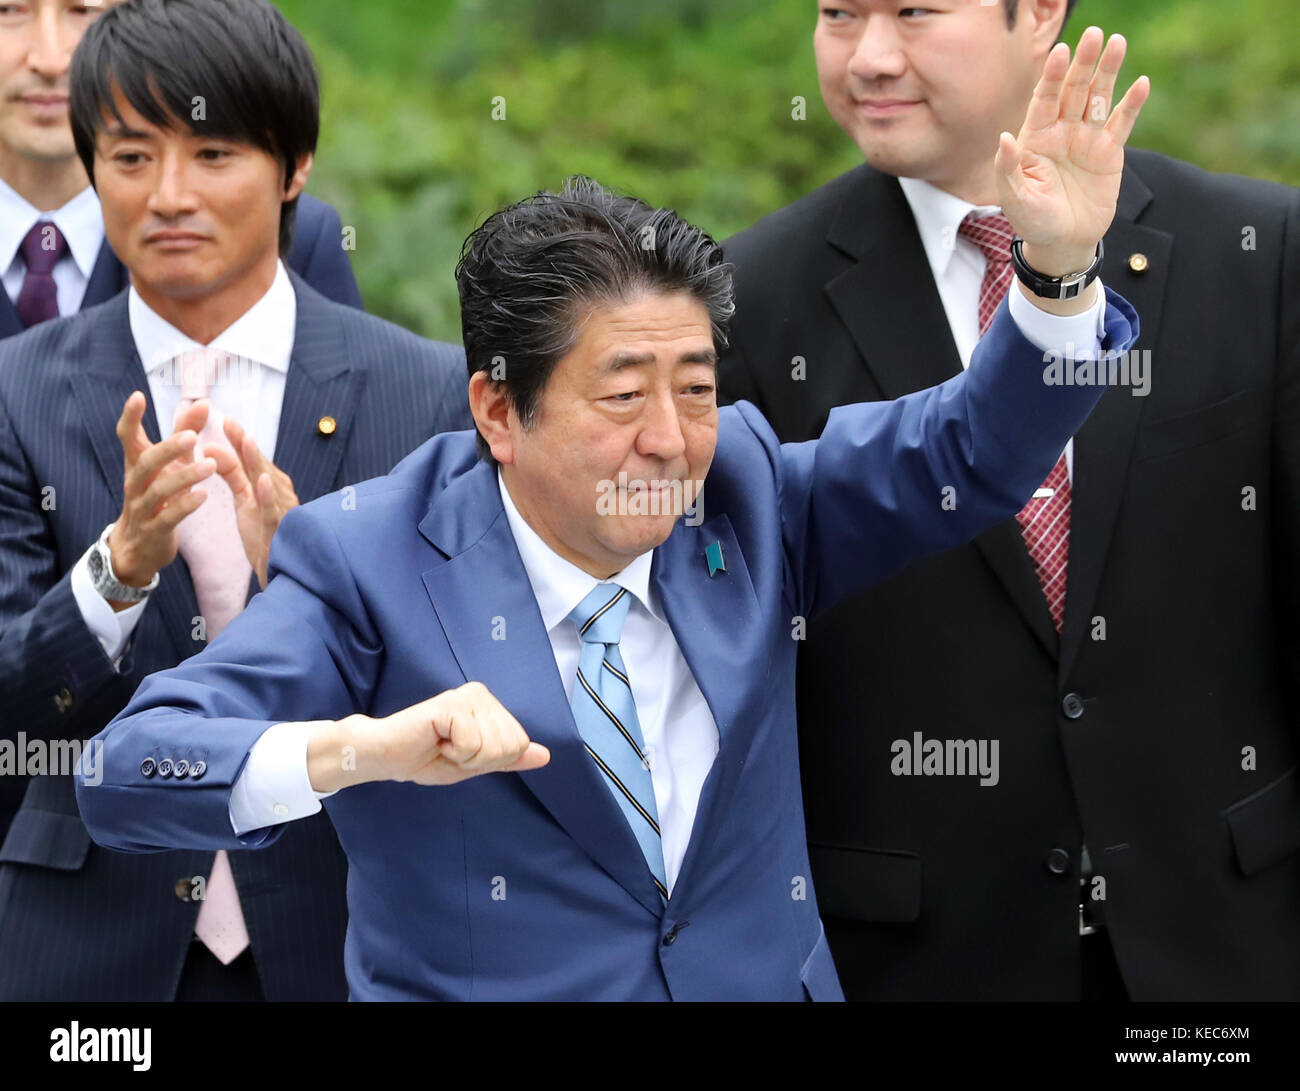 Tokyo, Japan. 20th Oct, 2017. Japanese Prime Minister and ruling LDP leader Shinzo Abe waves to supporters upon his arival at an election campaign in Fujisawa, suburban Tokyo on Friday, Octoebr 20, 2017. Japan's general election will be held on October 22. Credit: Yoshio Tsunoda/AFLO/Alamy Live News Stock Photo